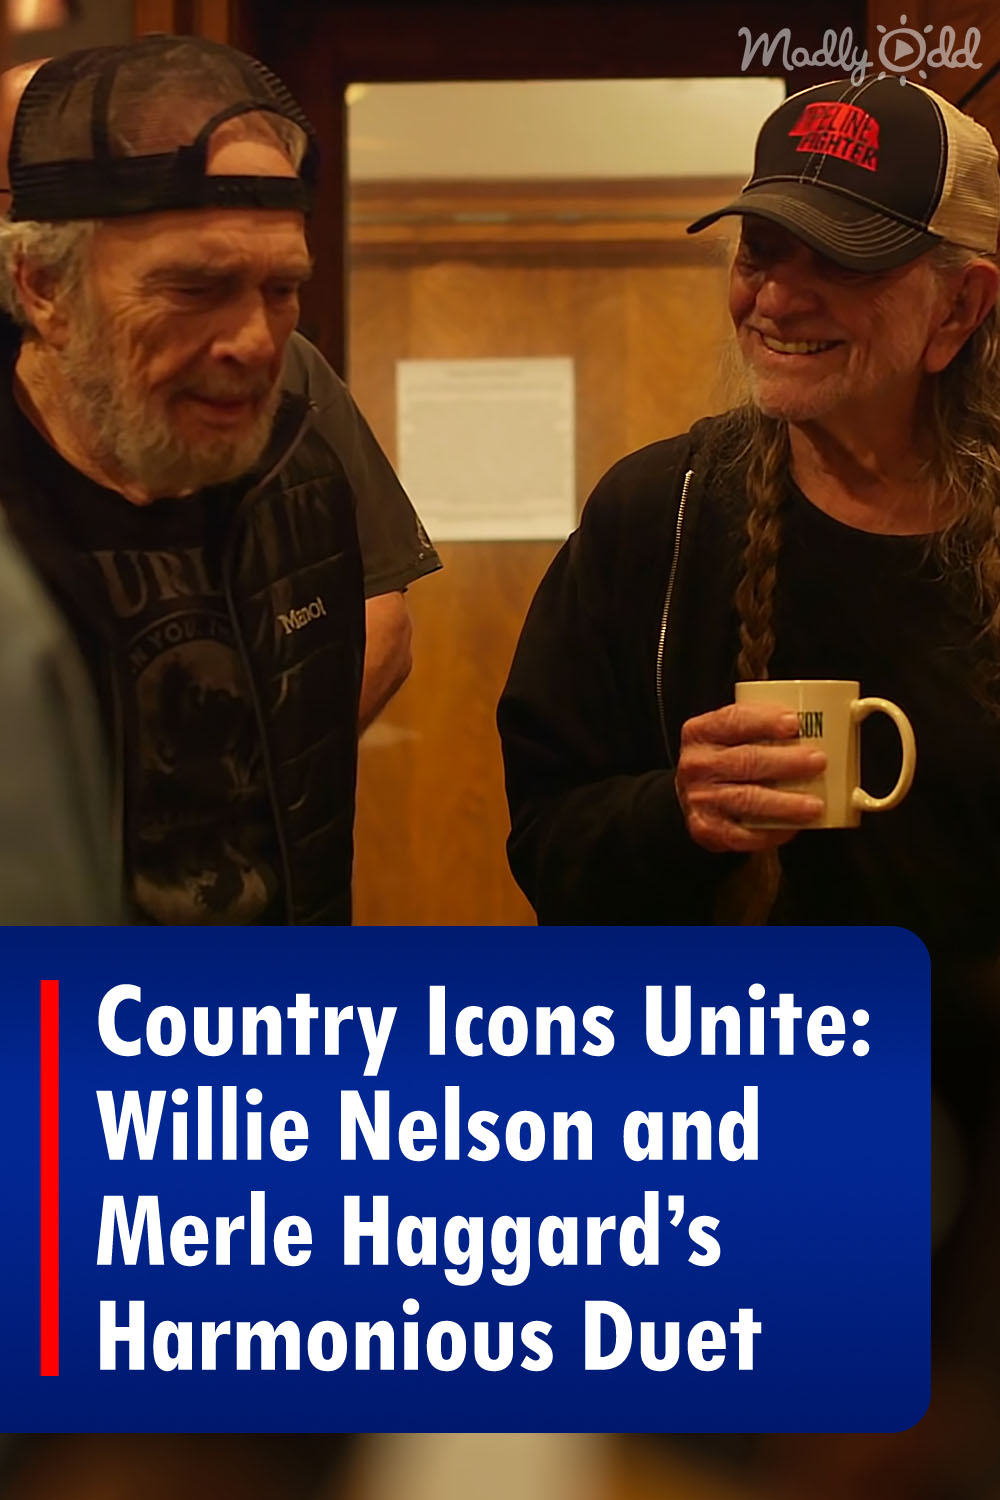 Country Icons Unite: Willie Nelson and Merle Haggard’s Harmonious Duet